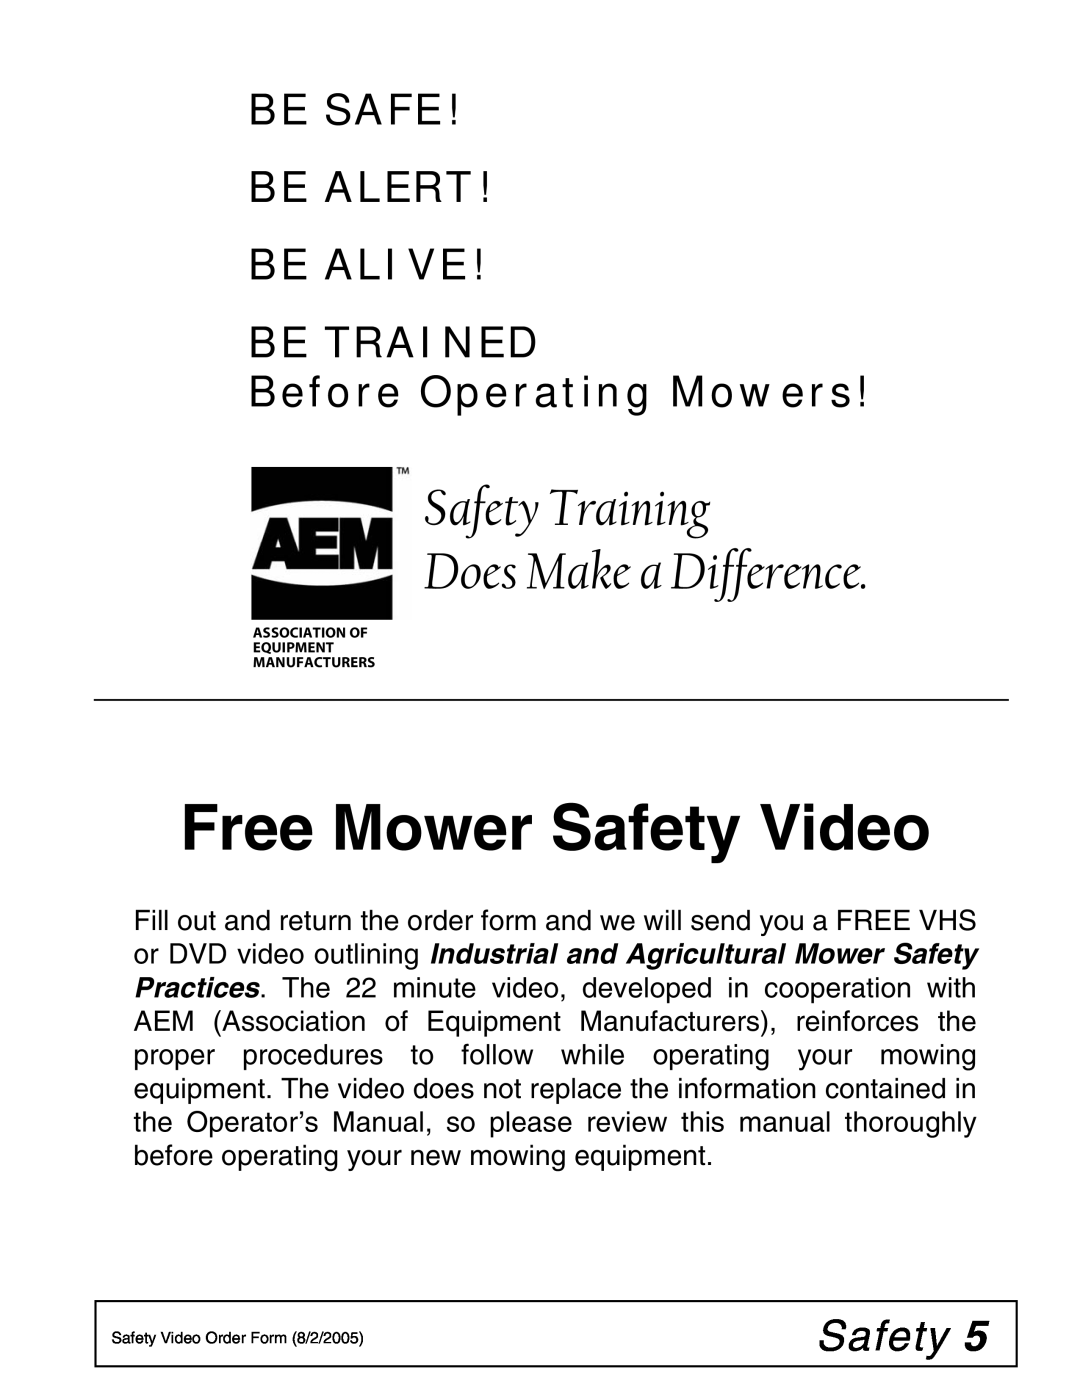 Woods Equipment BB600X, BB840XP, BB720X Free Mower Safety Video, Safety Training Does Make a Difference, Be Safe 